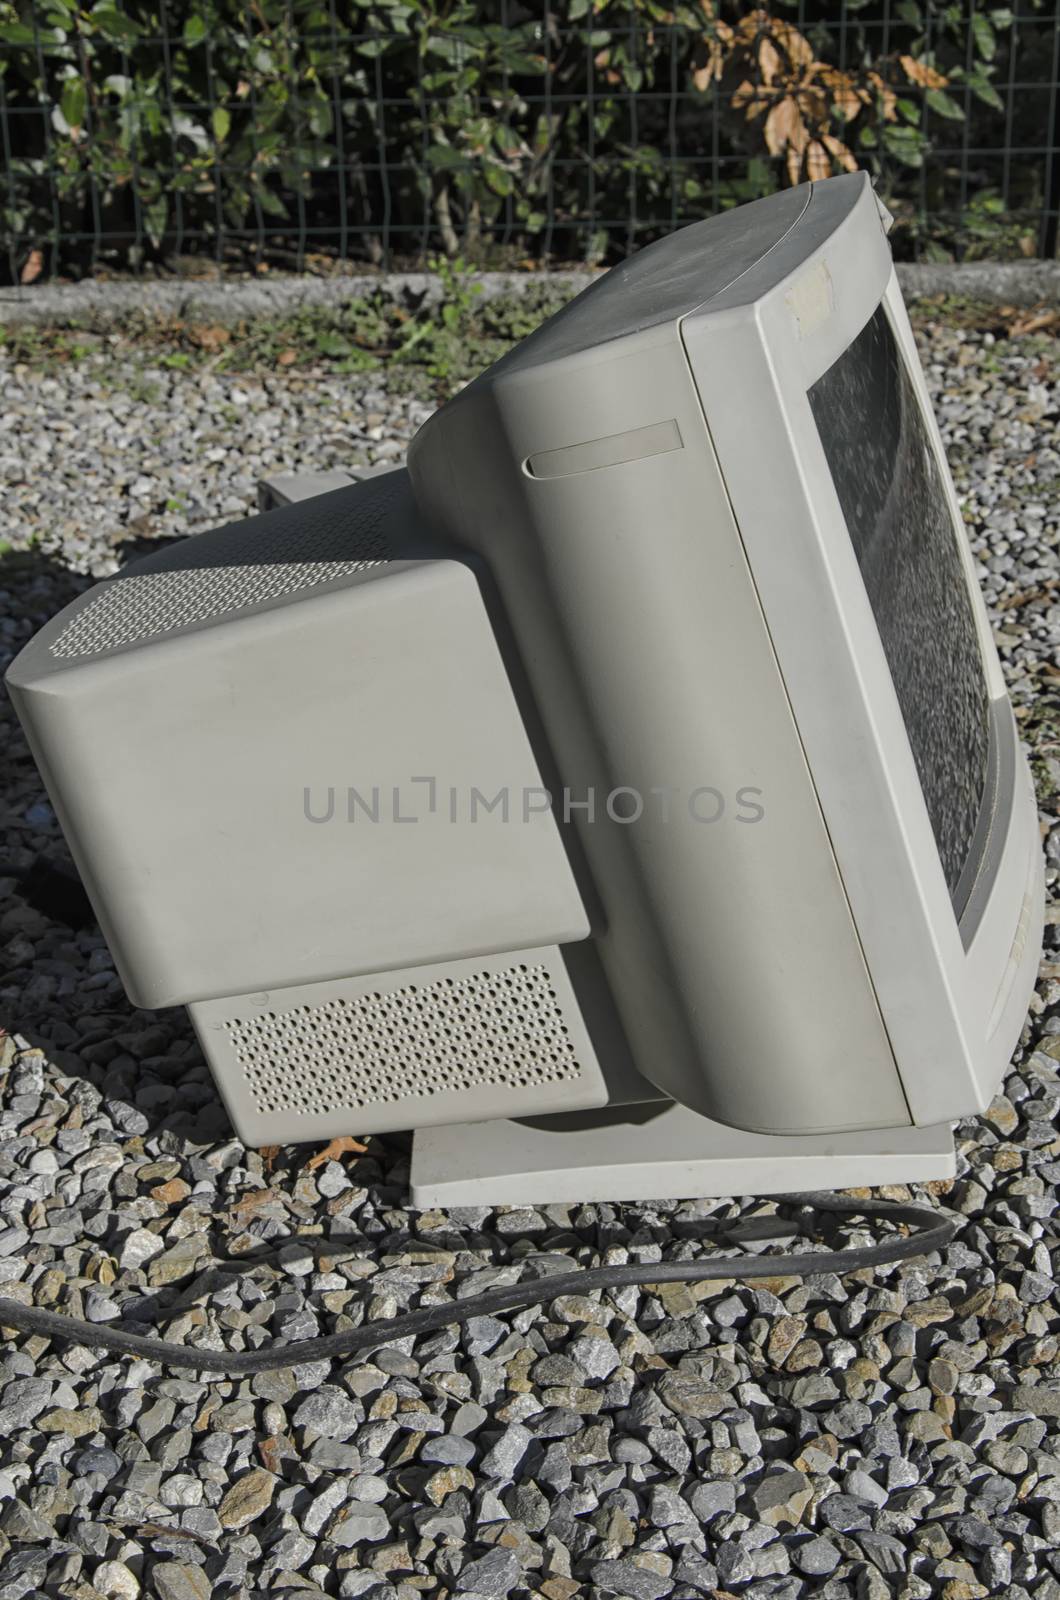 View of a VGA monitor of the nineties